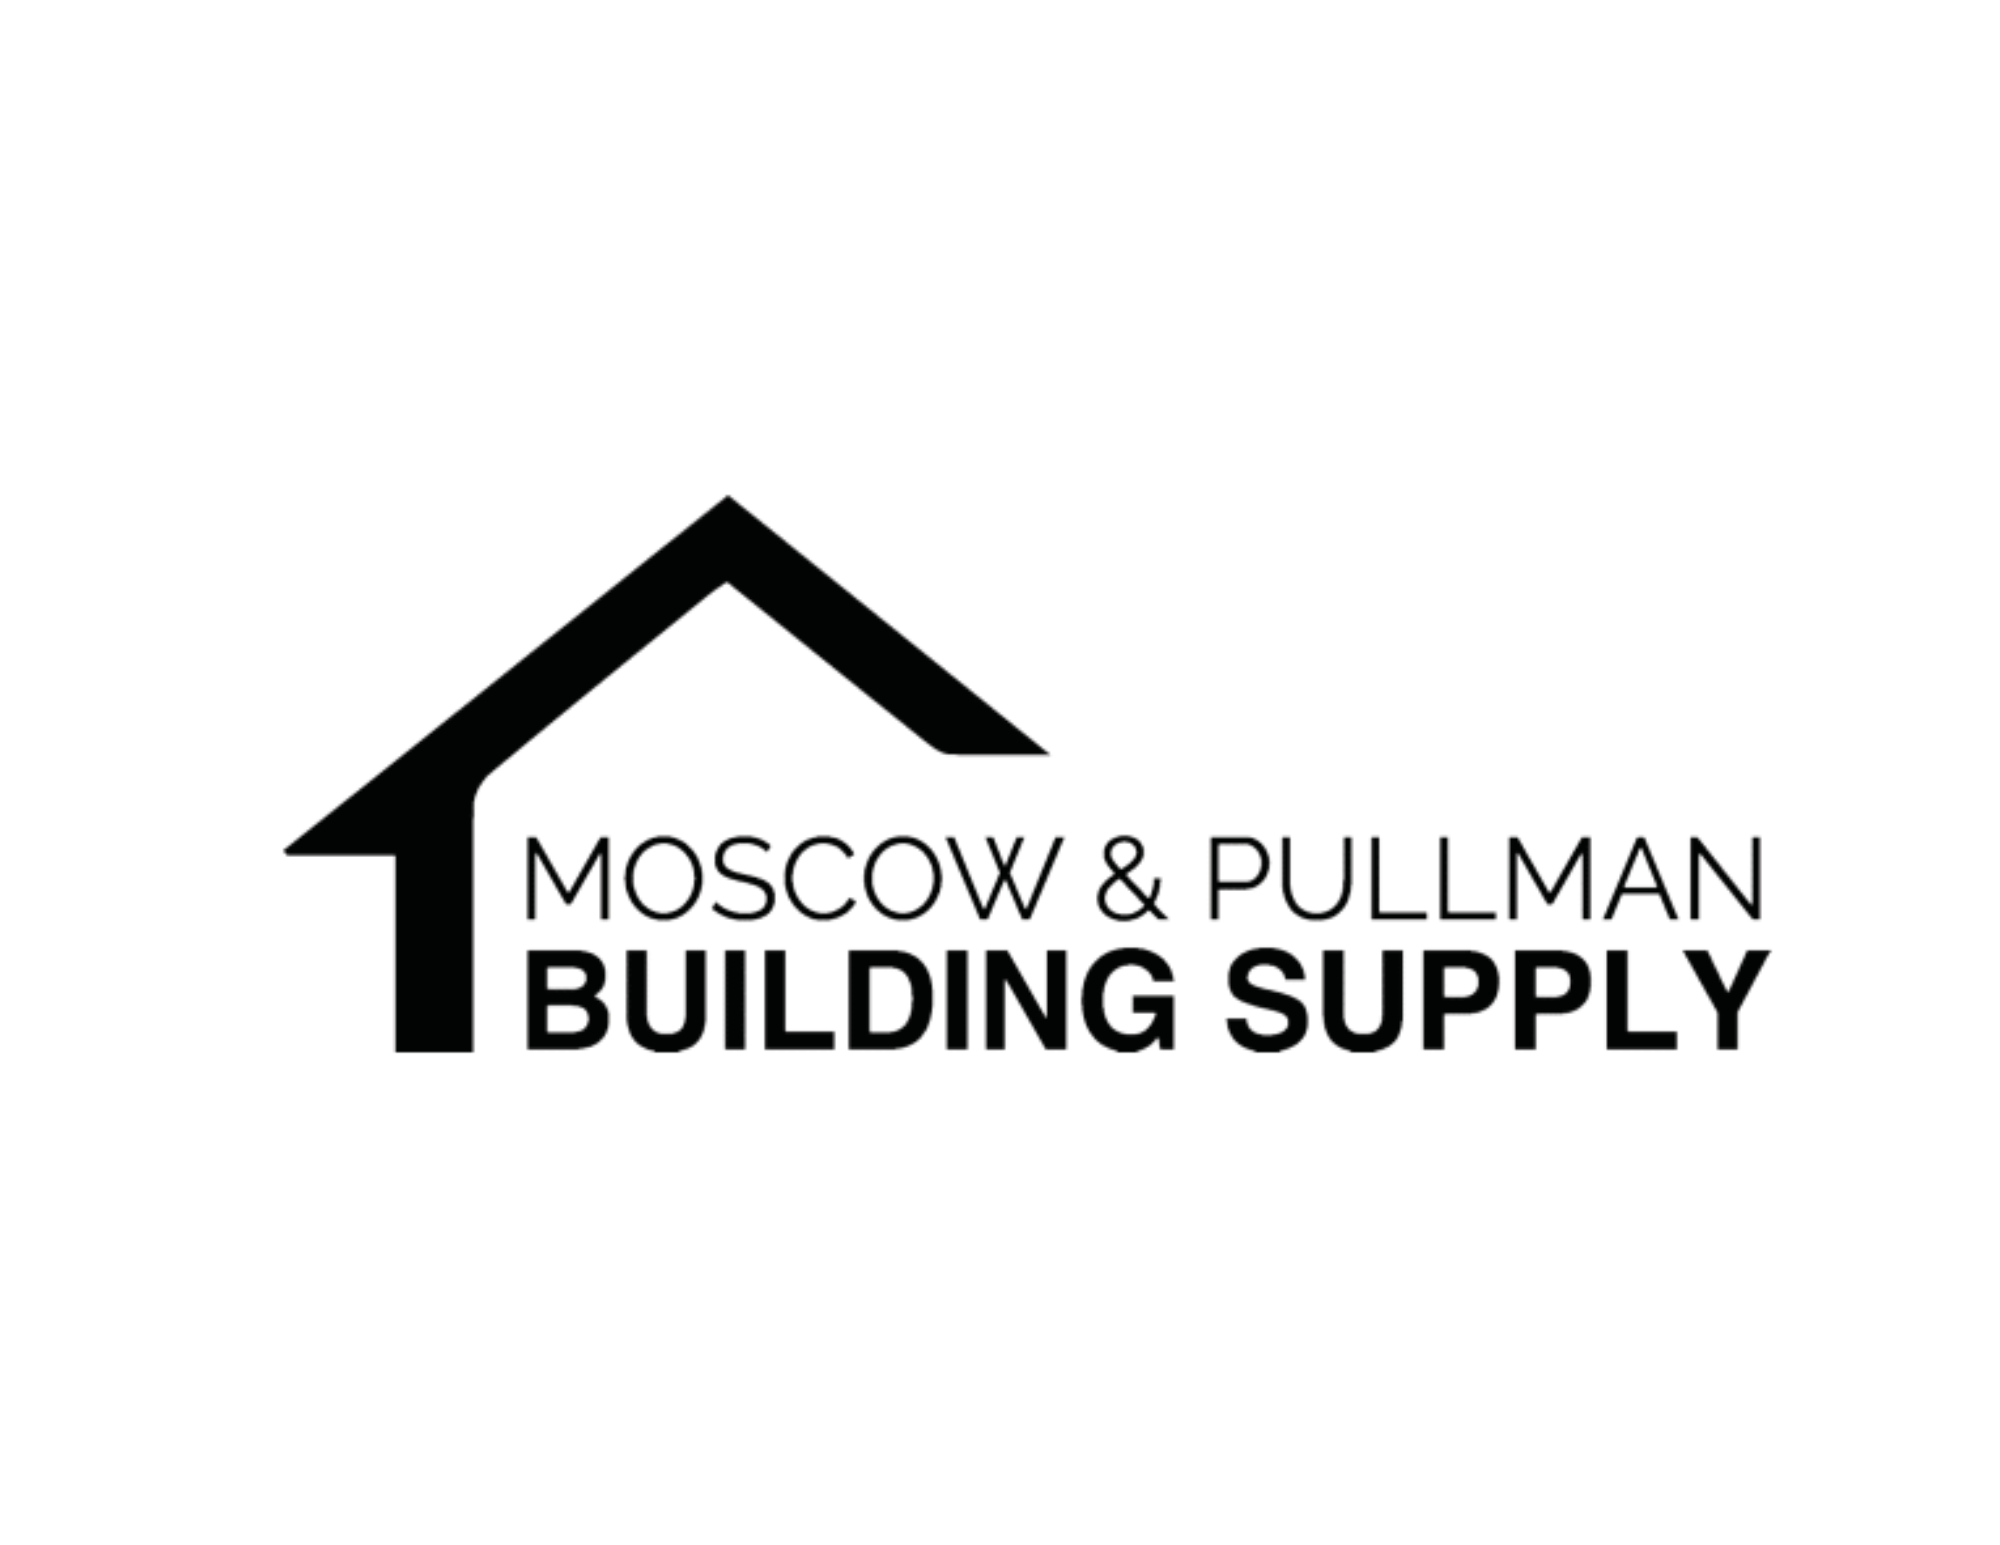 Moscow-Pullman Building Supply